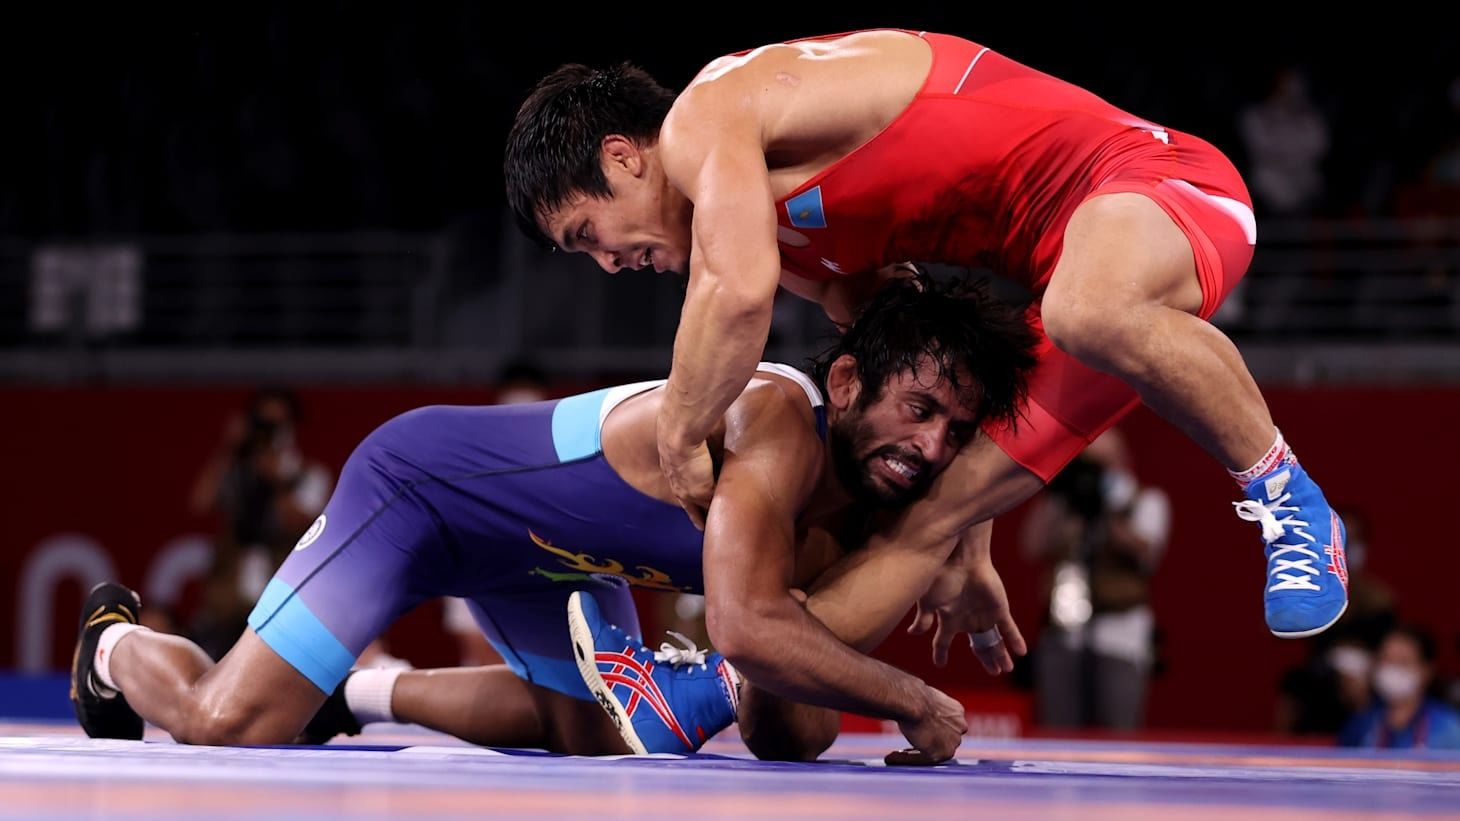 Iranian Wrestler Misses Olympic Spot After Celebrating Too Early